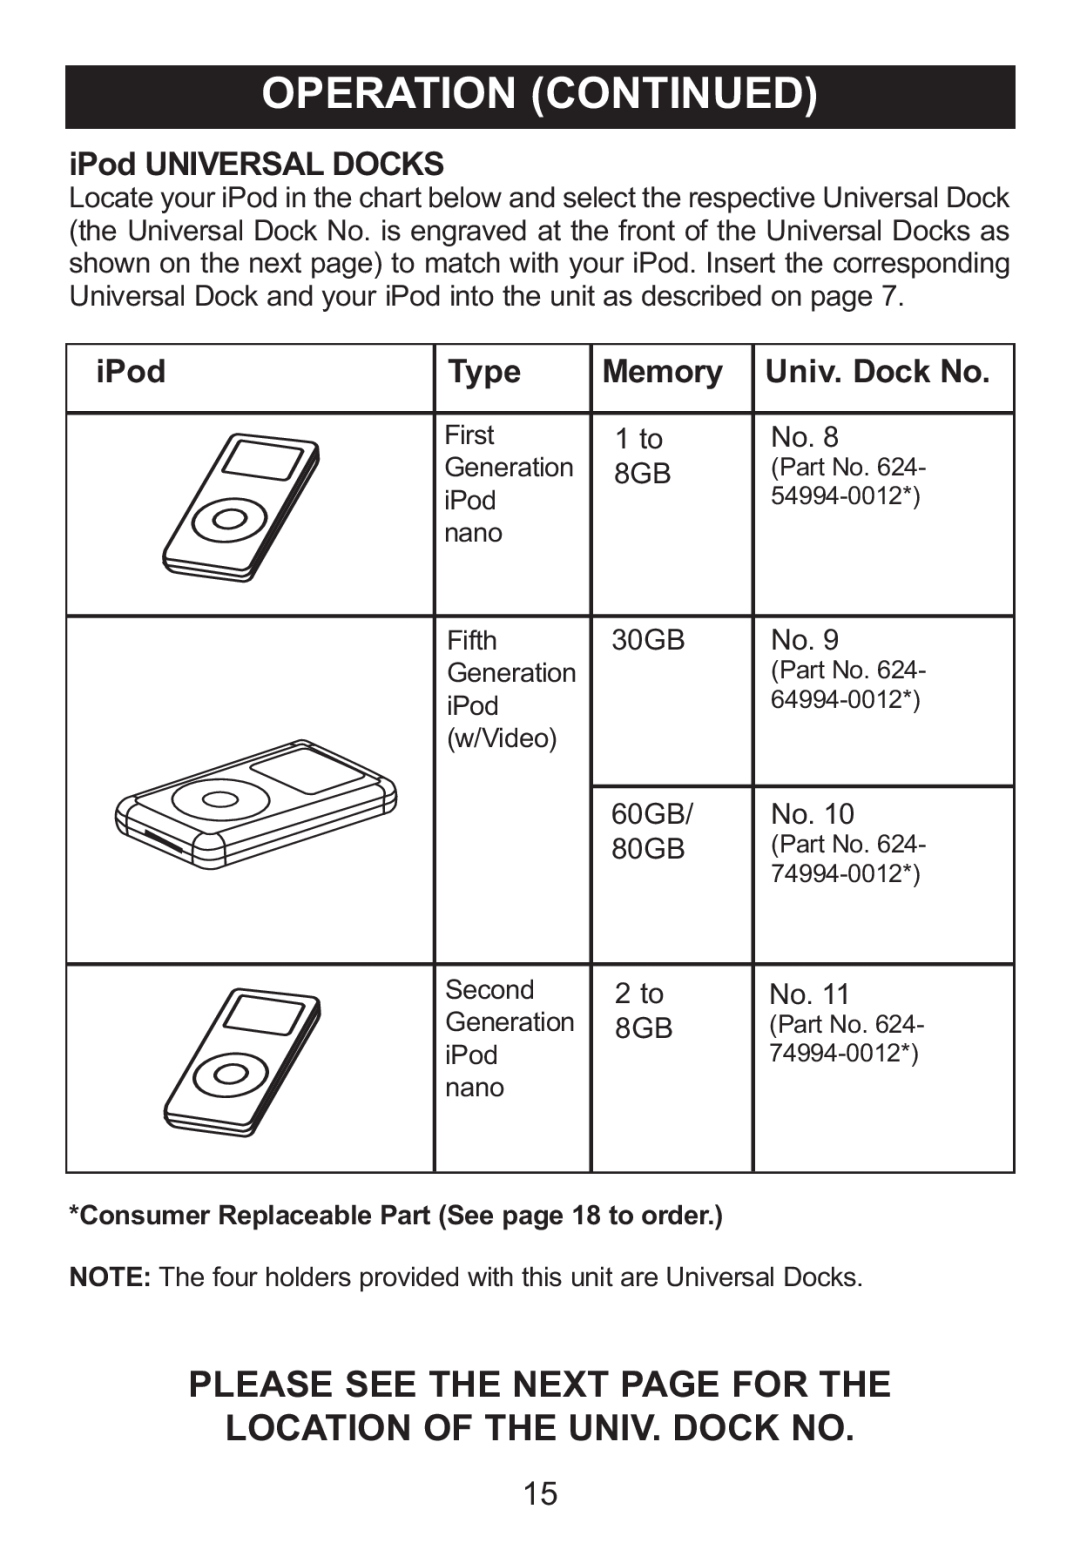 Memorex M12001 manual Please See The Next Page For The Location Of The Univ. Dock No, iPod UNIVERSAL DOCKS, Type, Memory 